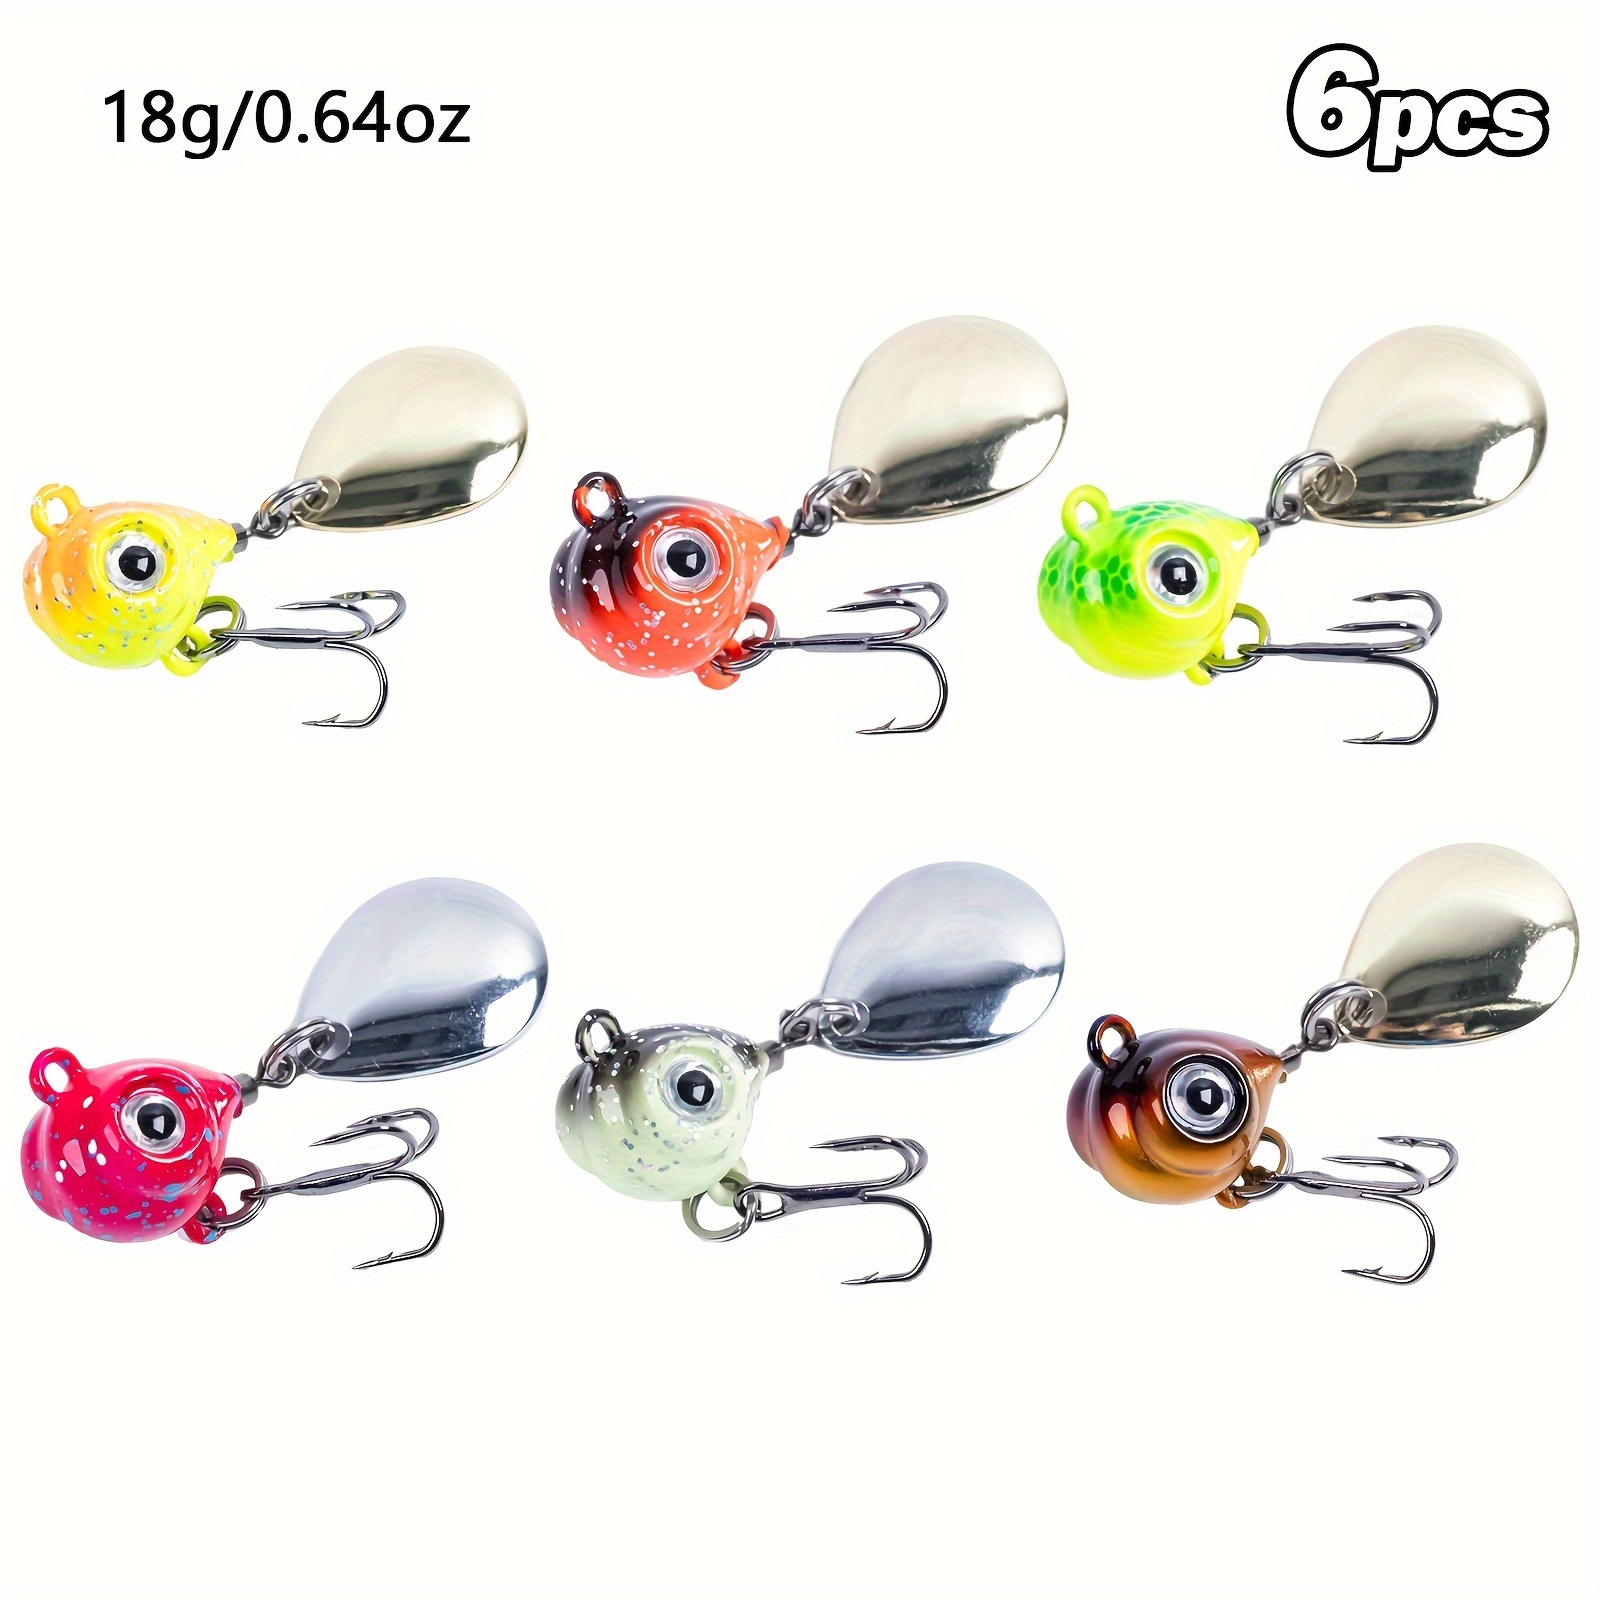 Spin Tail Jigs, Fishing Lures